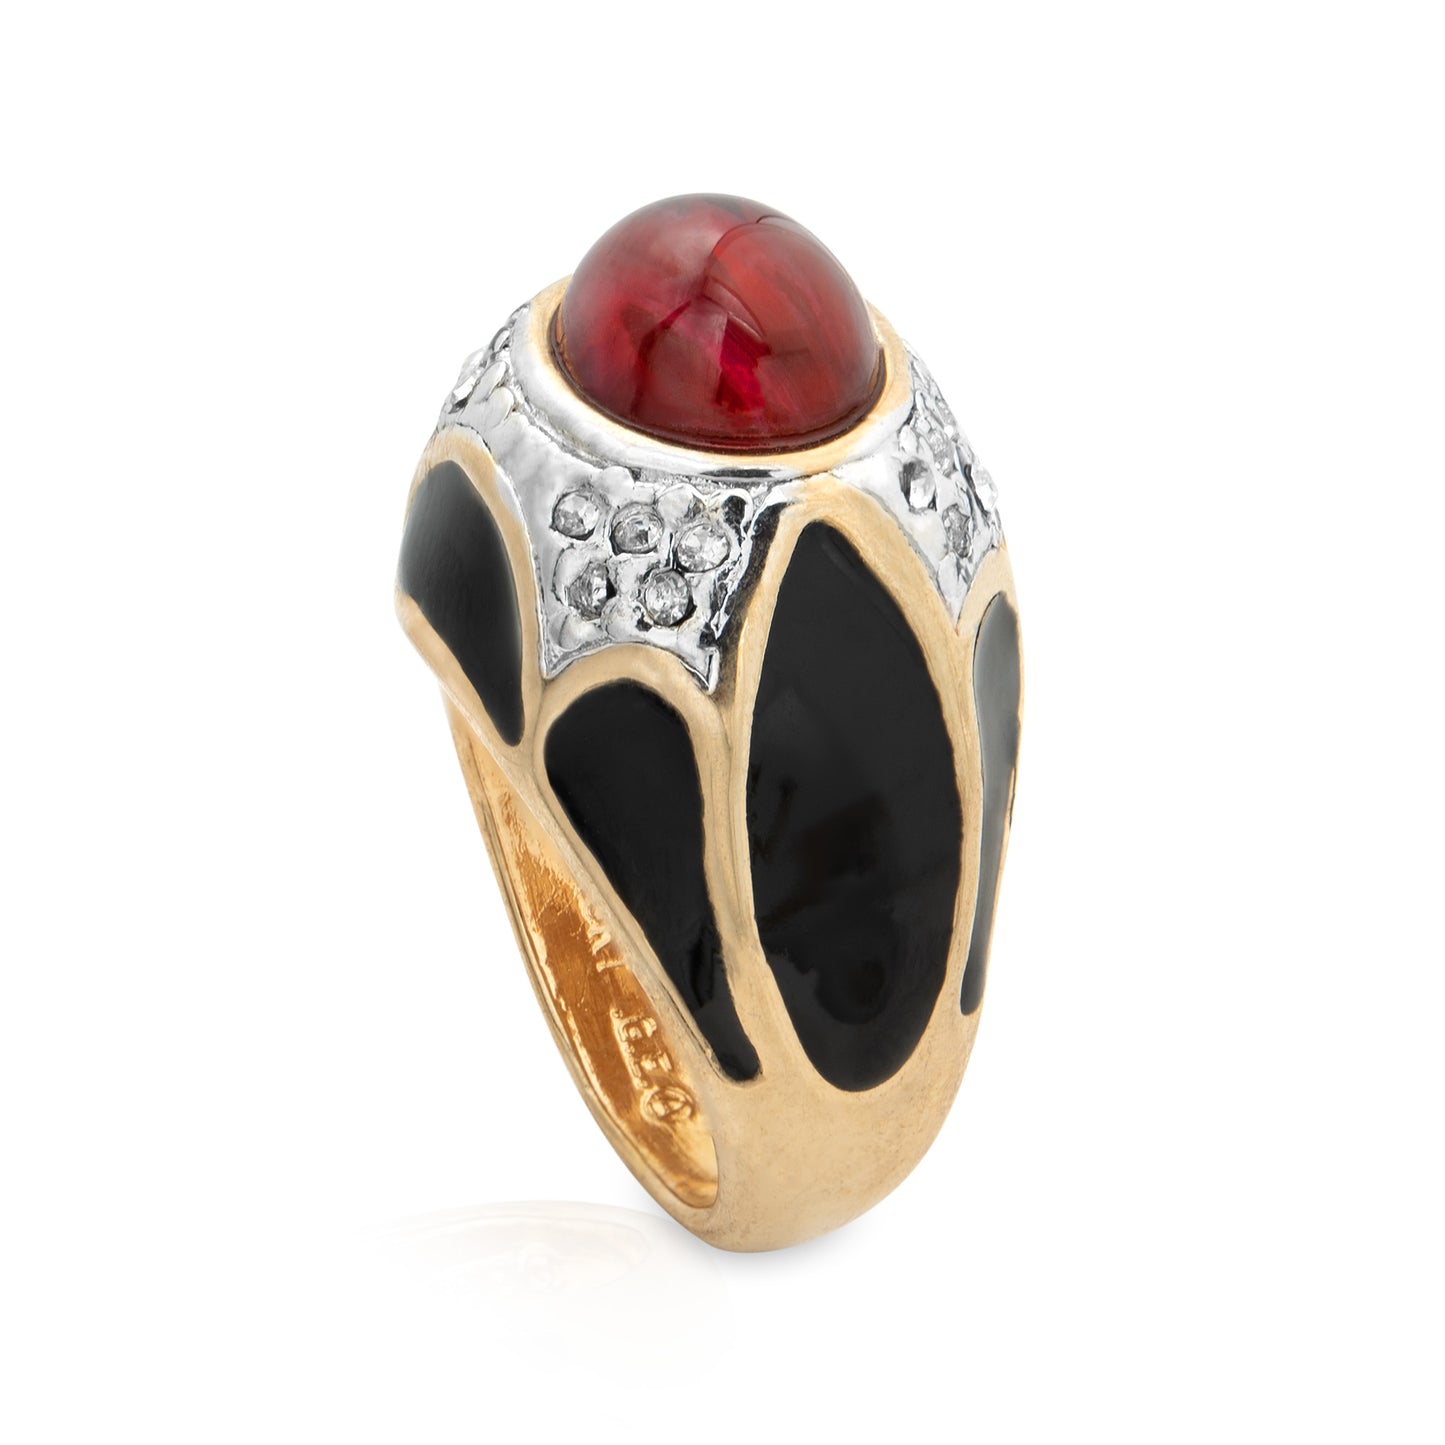 Vintage Ring 1980s Black Enamel Ring with Ruby Cabochon Stone Surrounded by Clear Crystals (6)